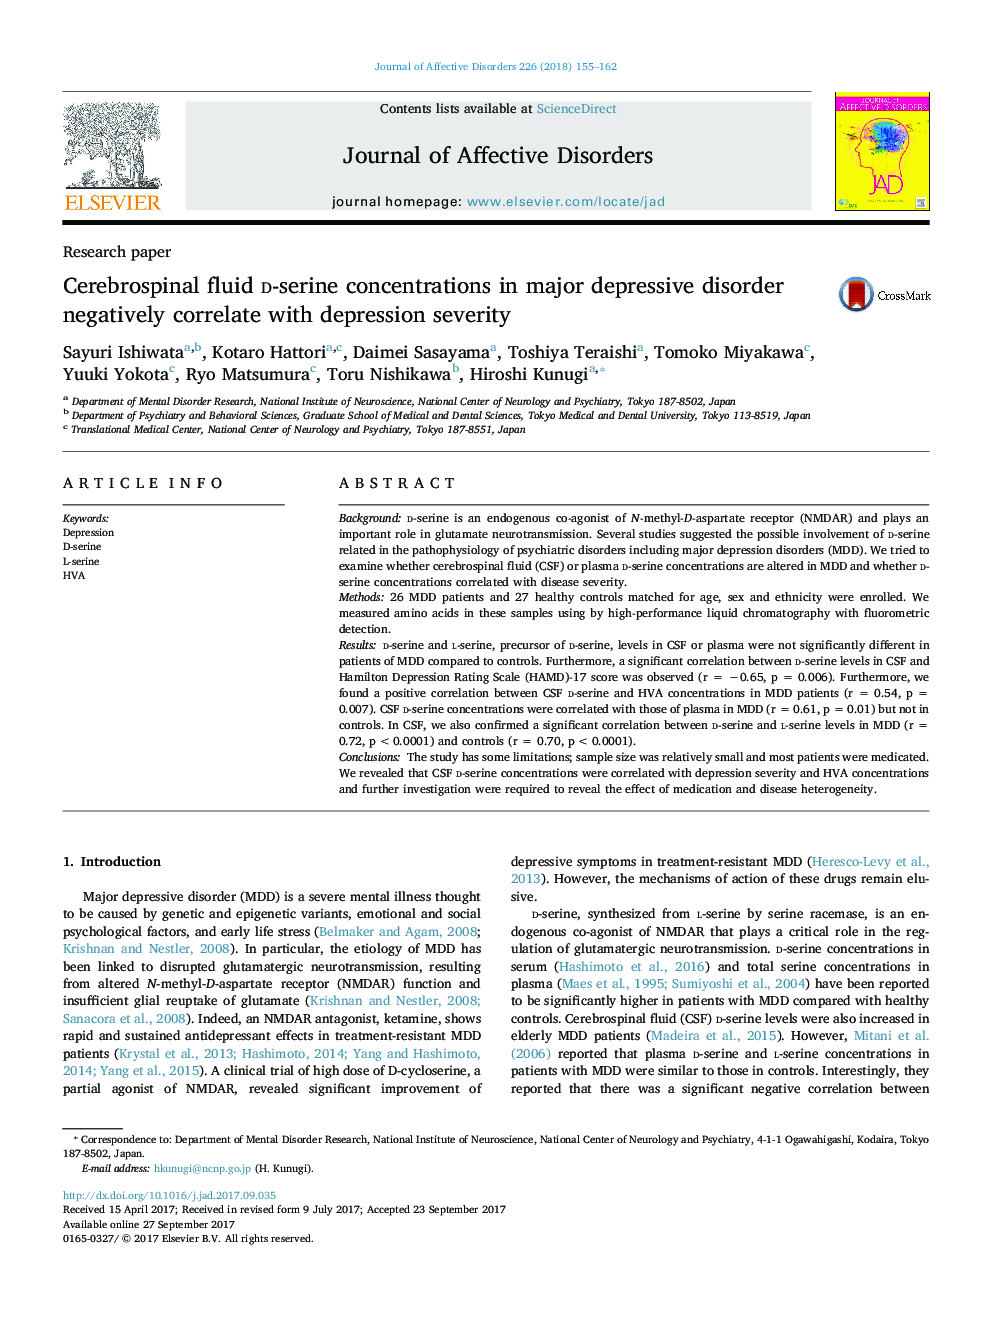 Research paperCerebrospinal fluid D-serine concentrations in major depressive disorder negatively correlate with depression severity